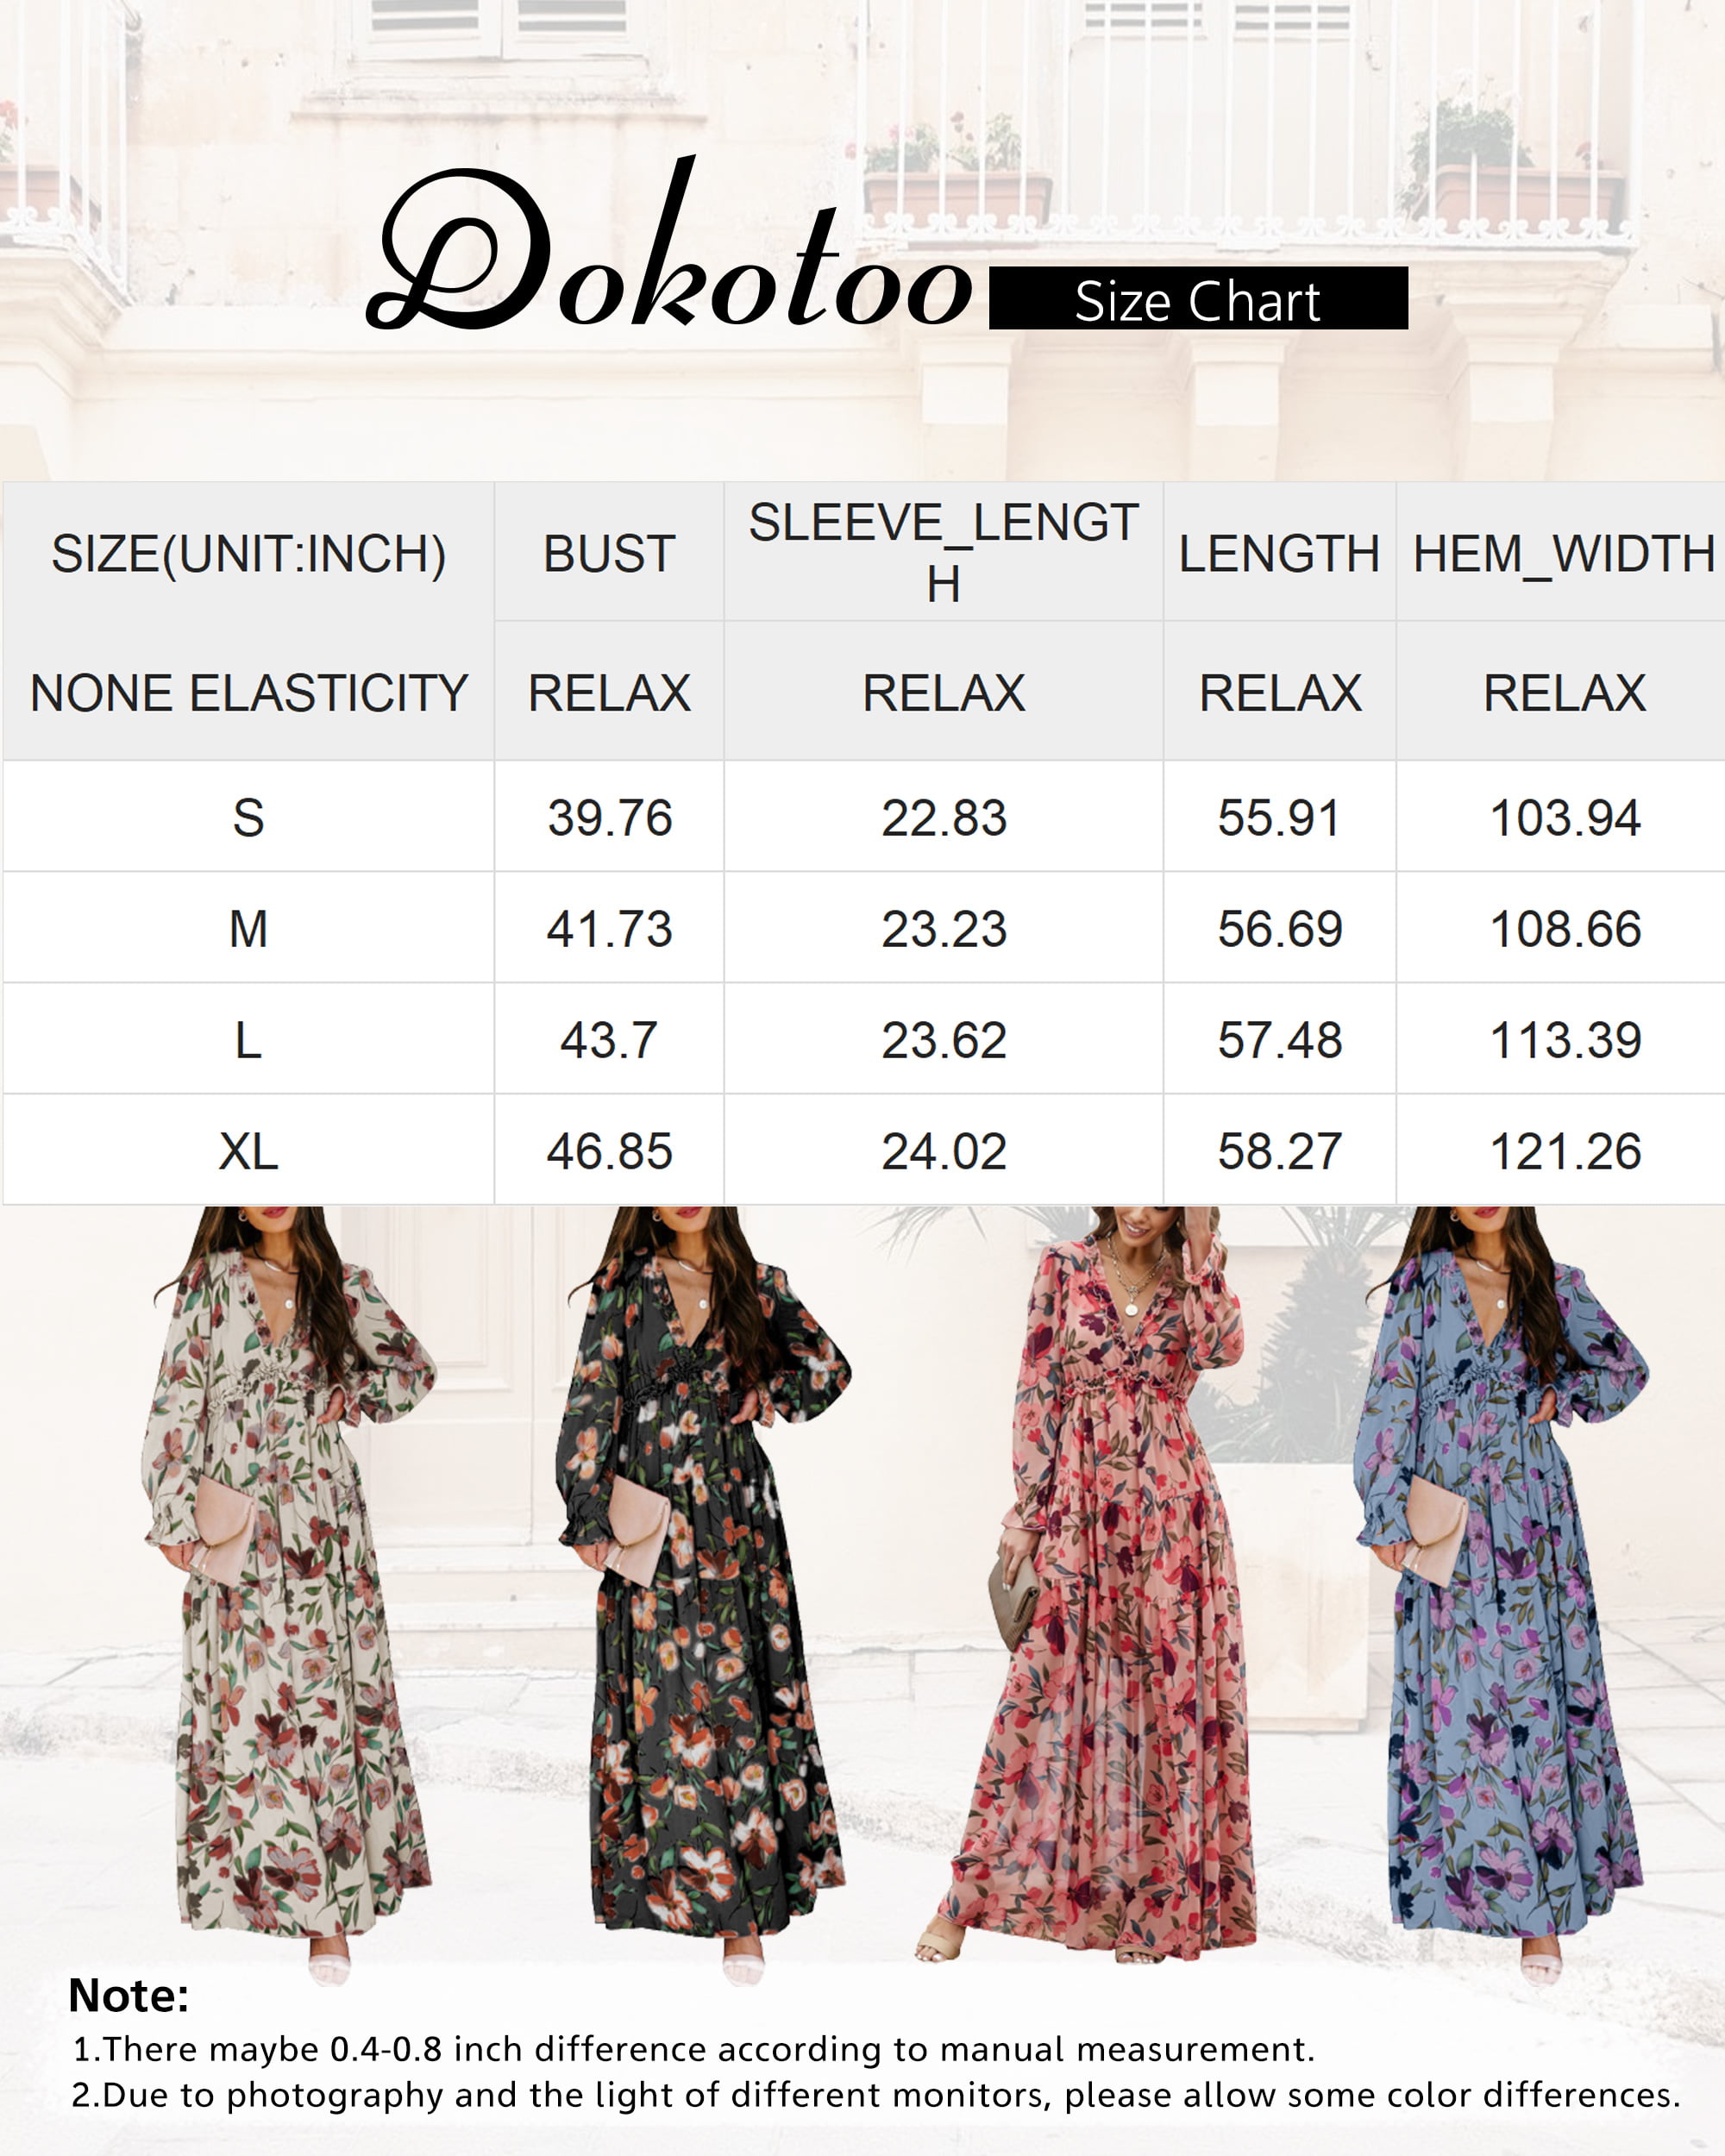 Dokotoo Women's Red Floral Maxi Dresses Casual Deep V Neck Long Sleeve Evening Dress Cocktail Party Dress for Women, US 8-10(M) - image 3 of 8